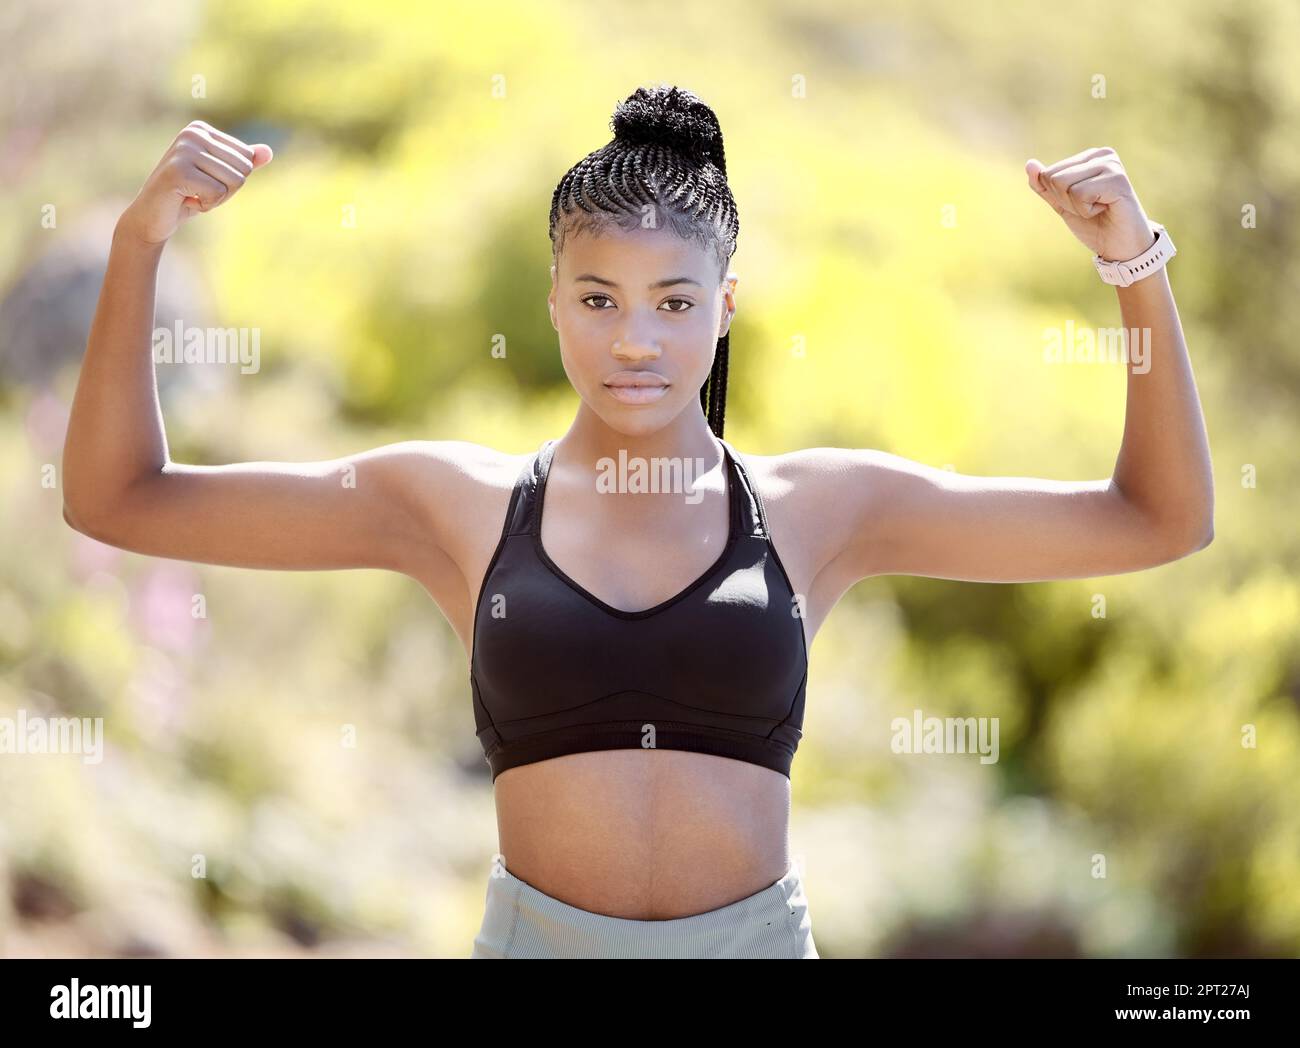 Fitness, strong arm muscles an black woman after a sports workout, training and exercise in nature. Portrait of a healthy female athlete with motivati Stock Photo